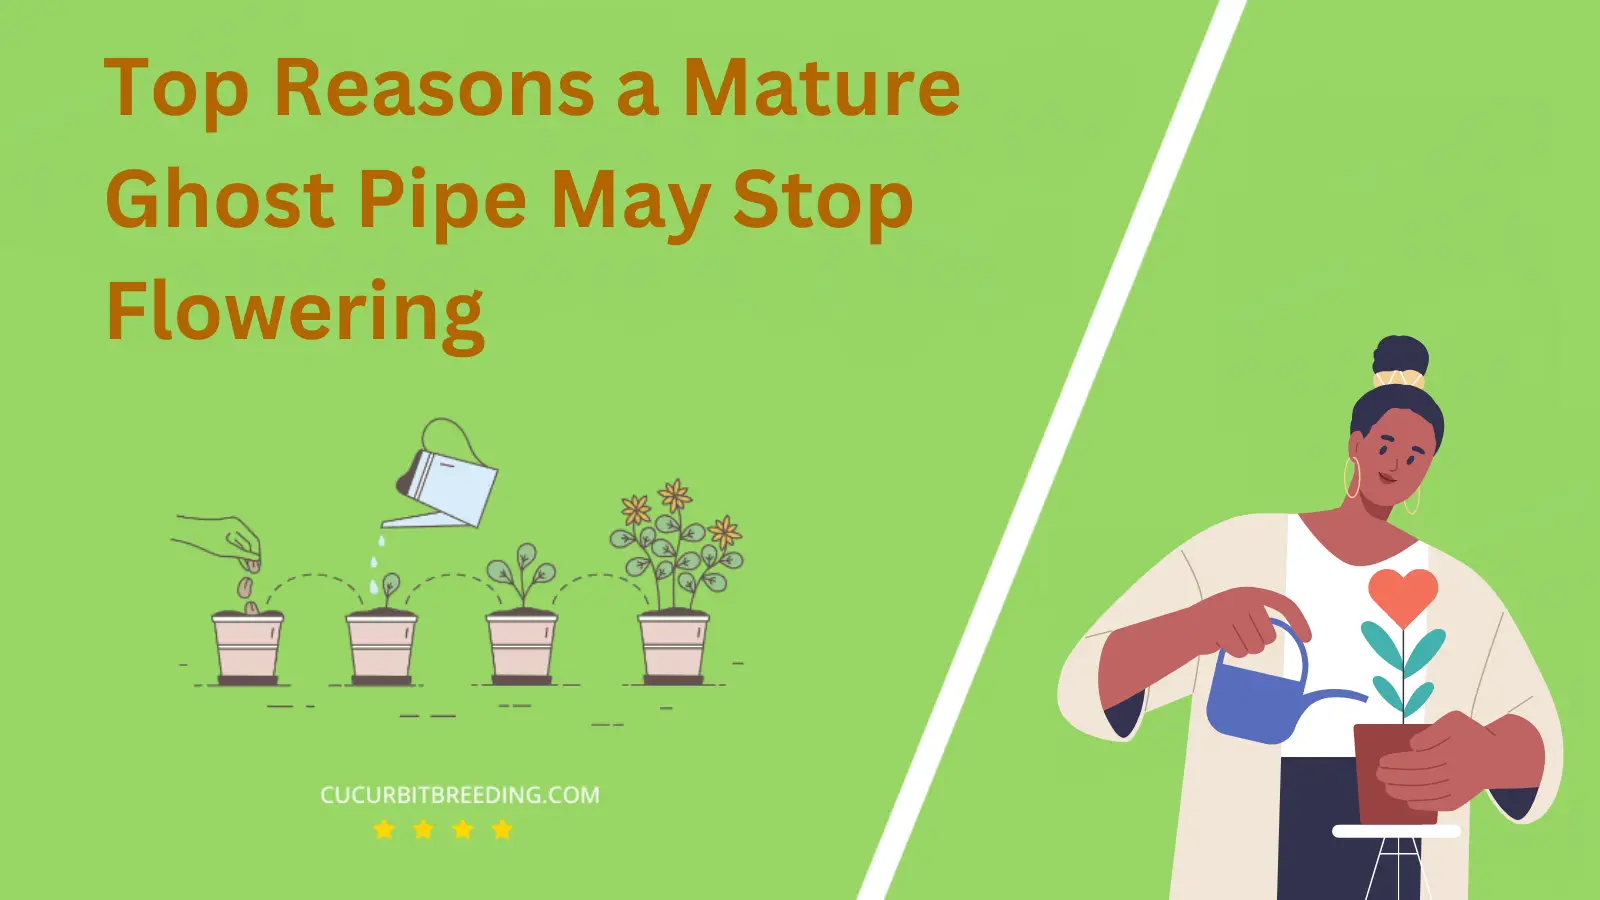 Top Reasons a Mature Ghost Pipe May Stop Flowering